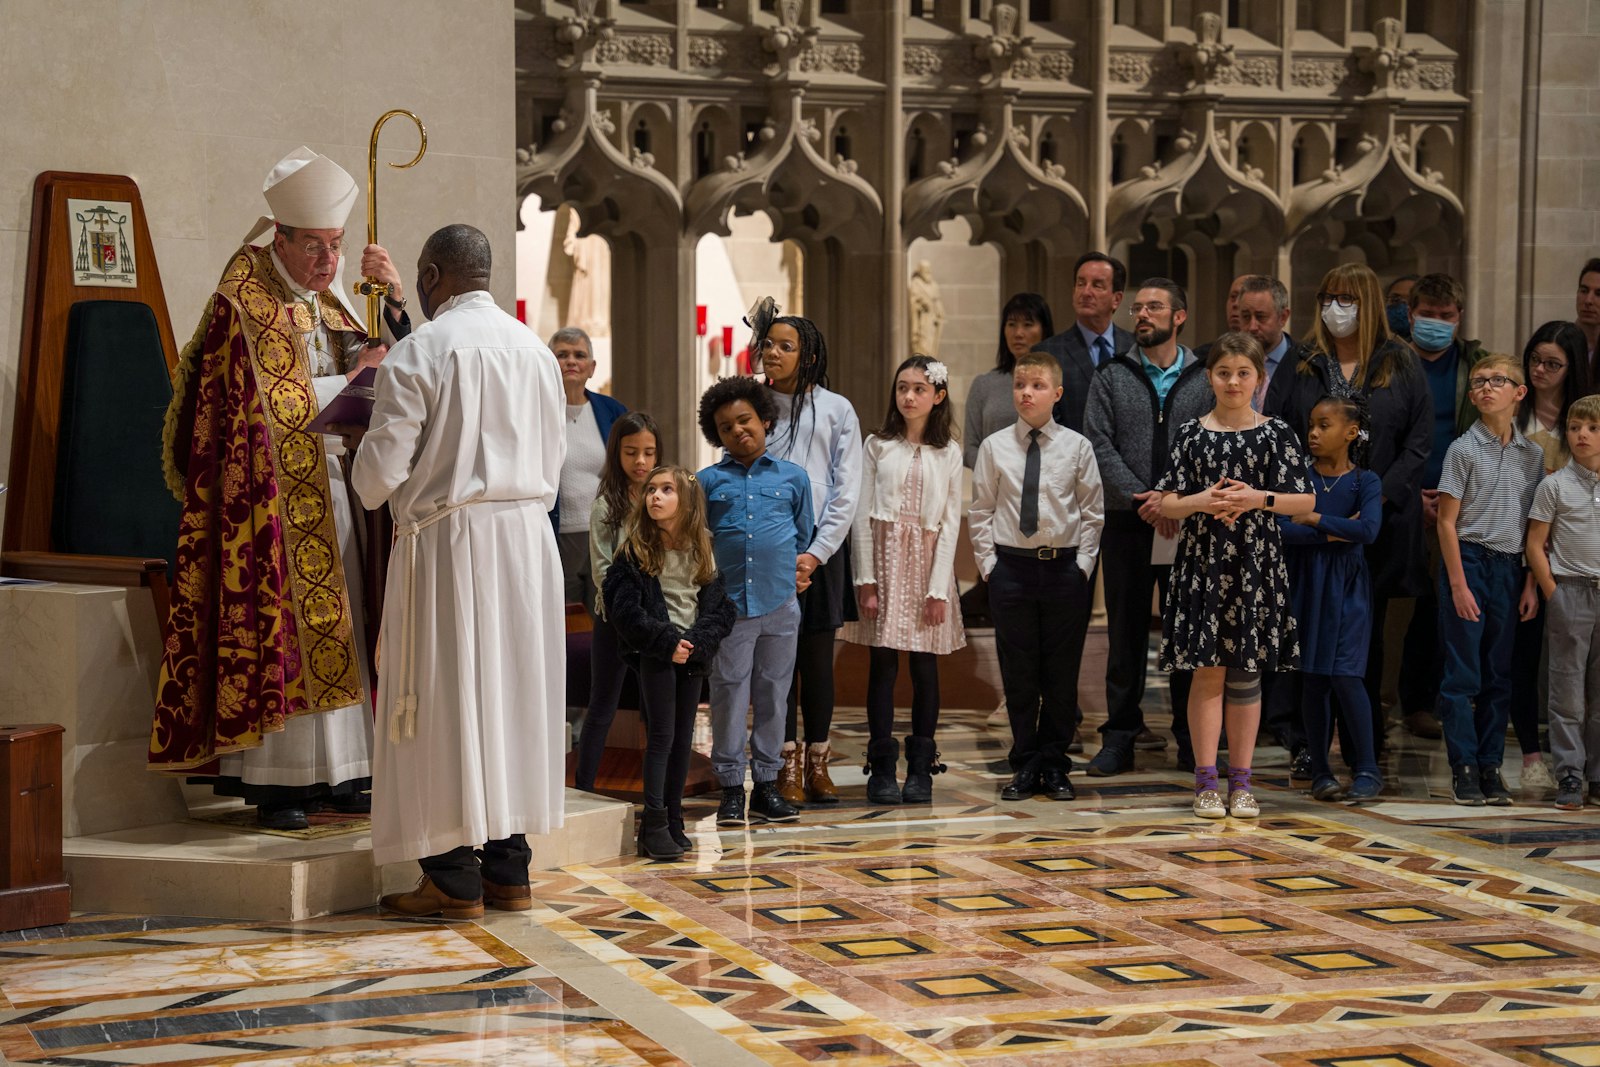 Archbishop Allen H. Vigneron questions catechumens preparing for baptism during the Rite of Election, asking them whether their intent is to follow Jesus in the fullness of the Catholic Church, which he established.